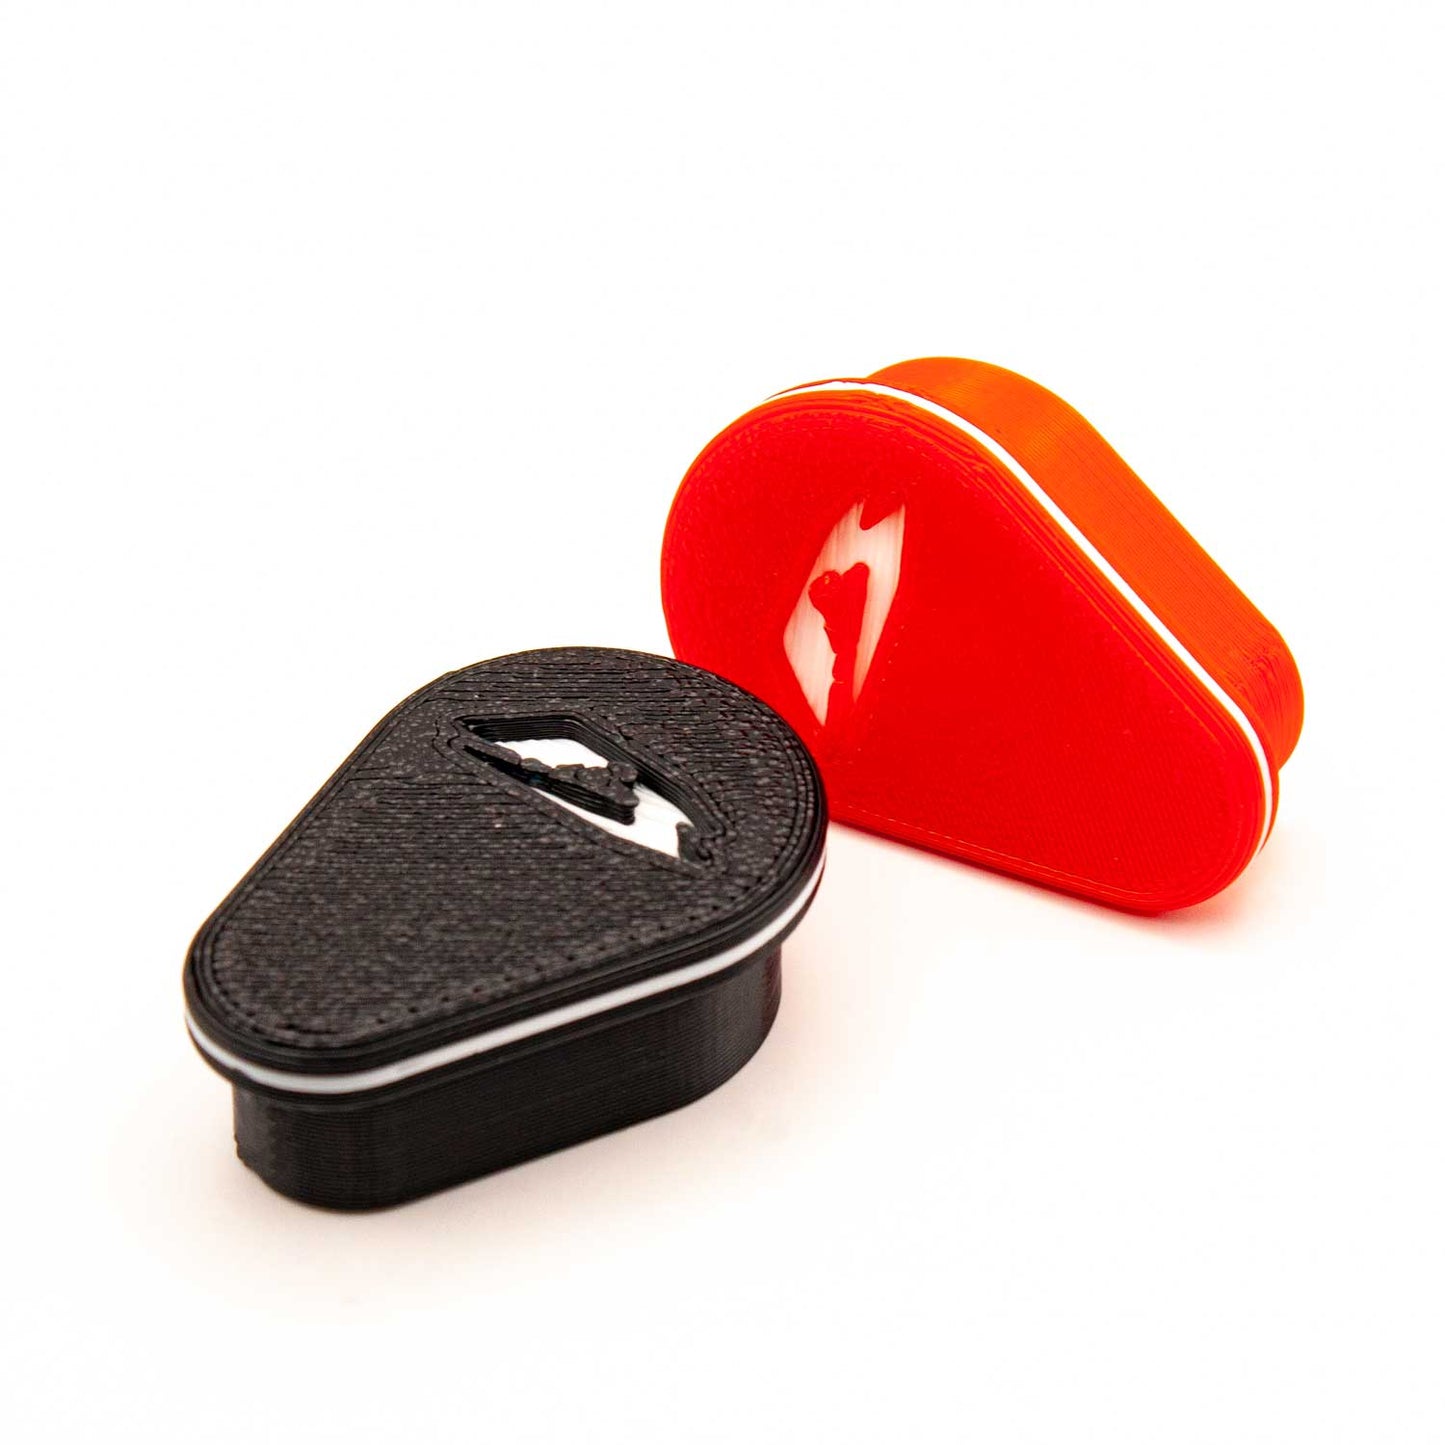 Keyway cover for Beta motorcycles